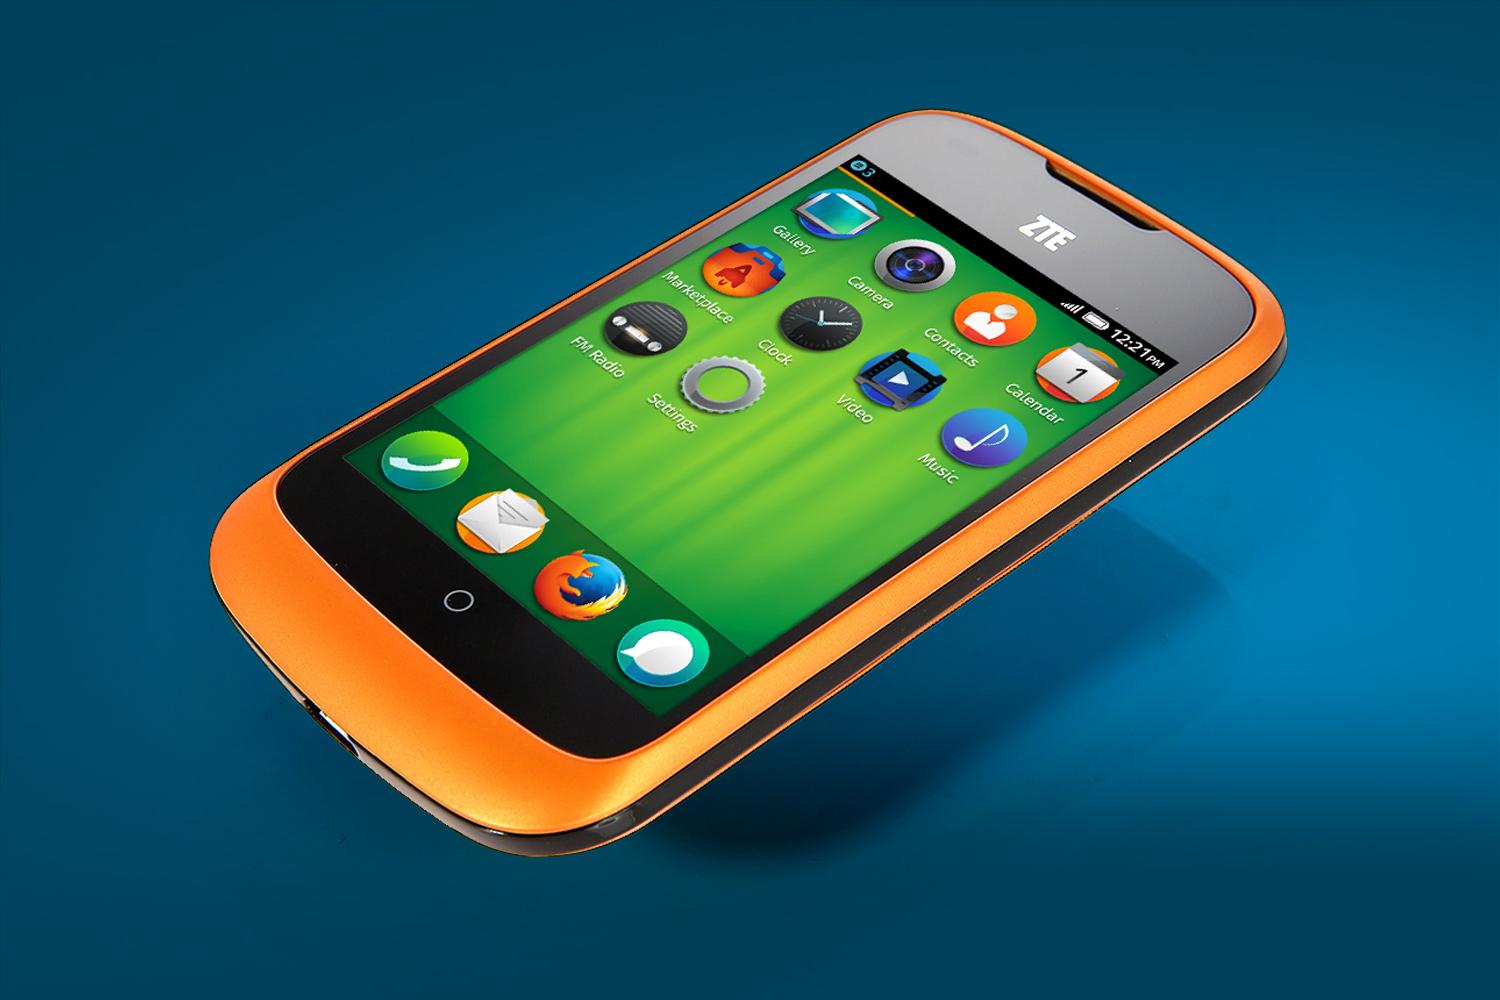 Mozilla launches Firefox OS phones in Morocco and Senegal